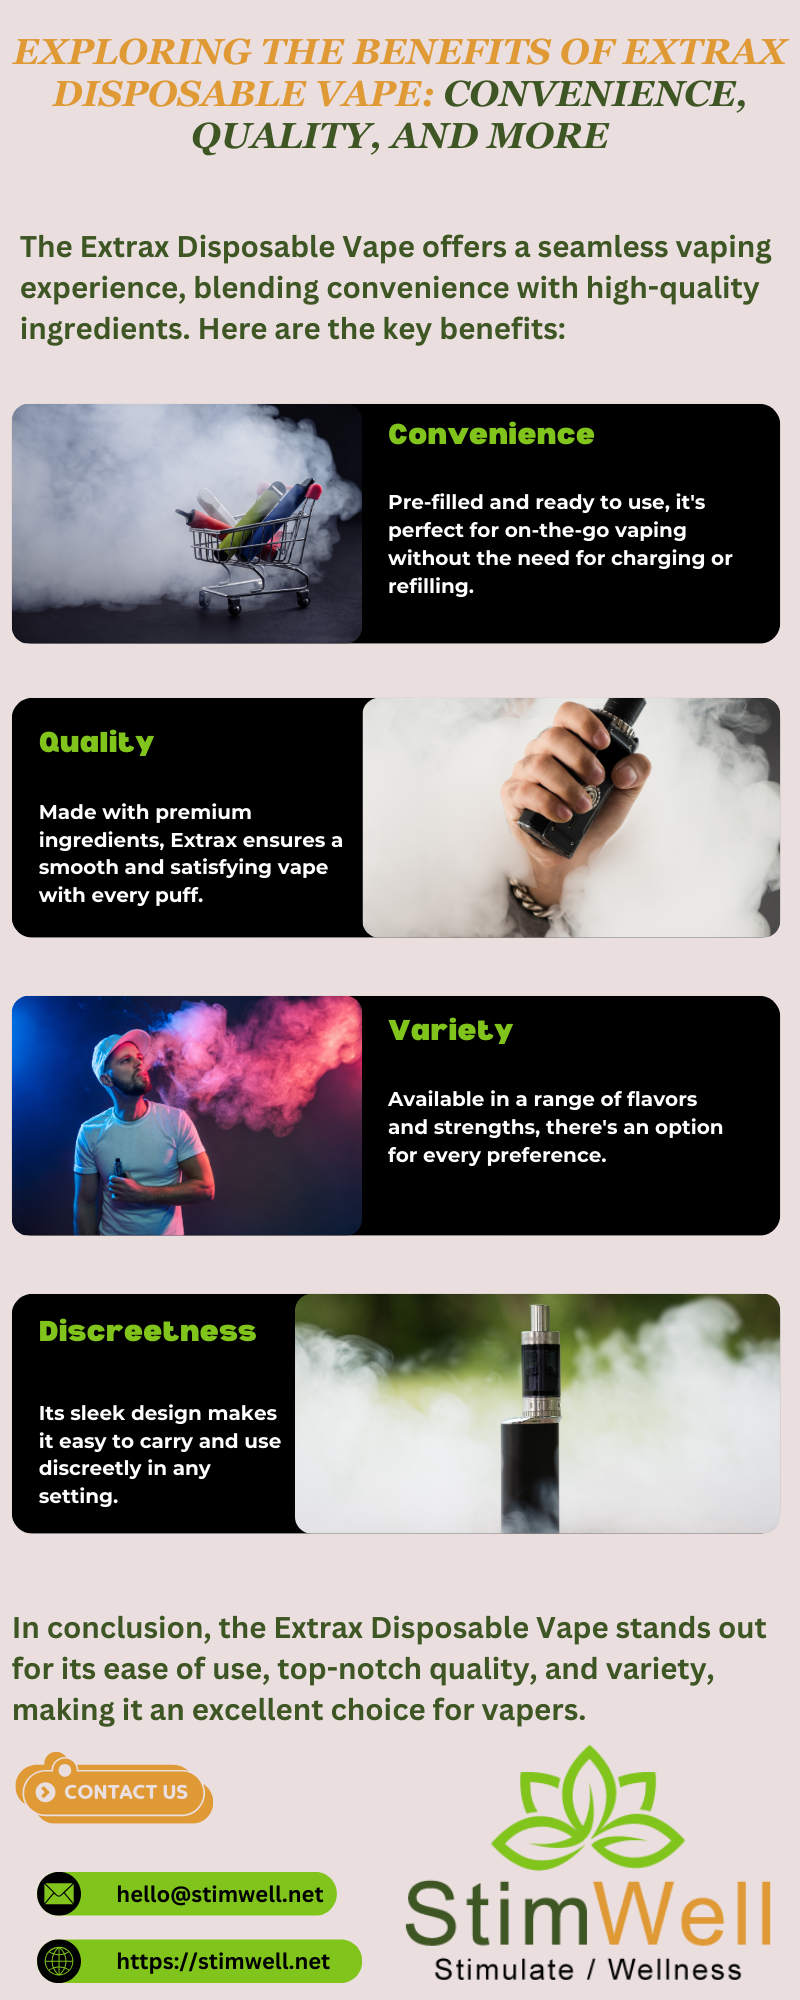 Exploring the Benefits of Extrax Disposable Vape Convenience, Quality, and More - Gifyu